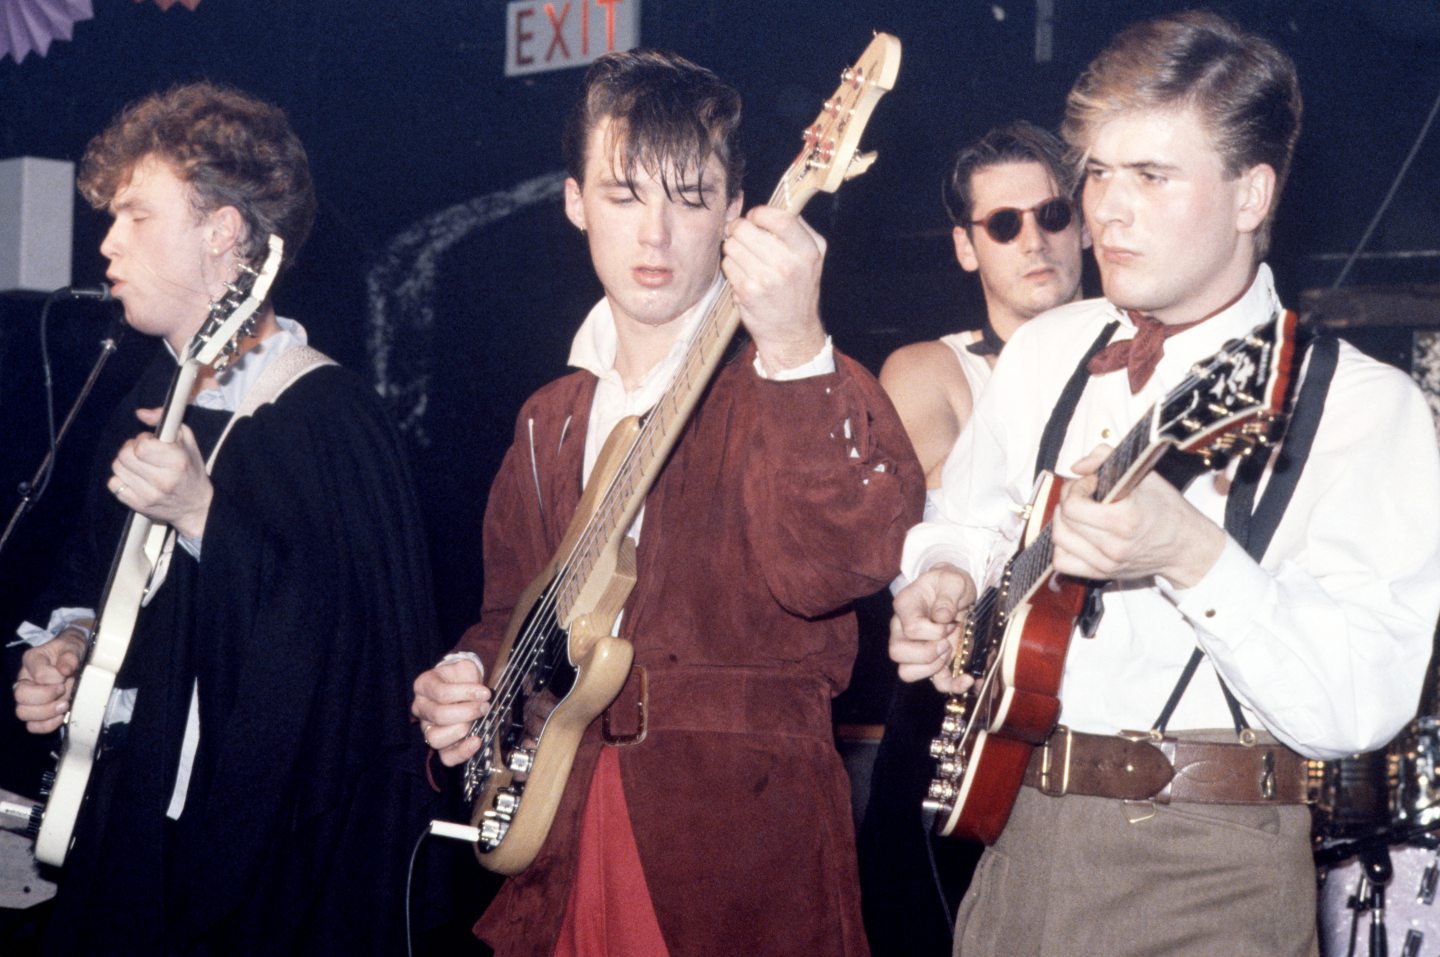 Martin and the Spandau boys were the pioneers of the New Romantic era in the 1980s. Image: Shutterstock.